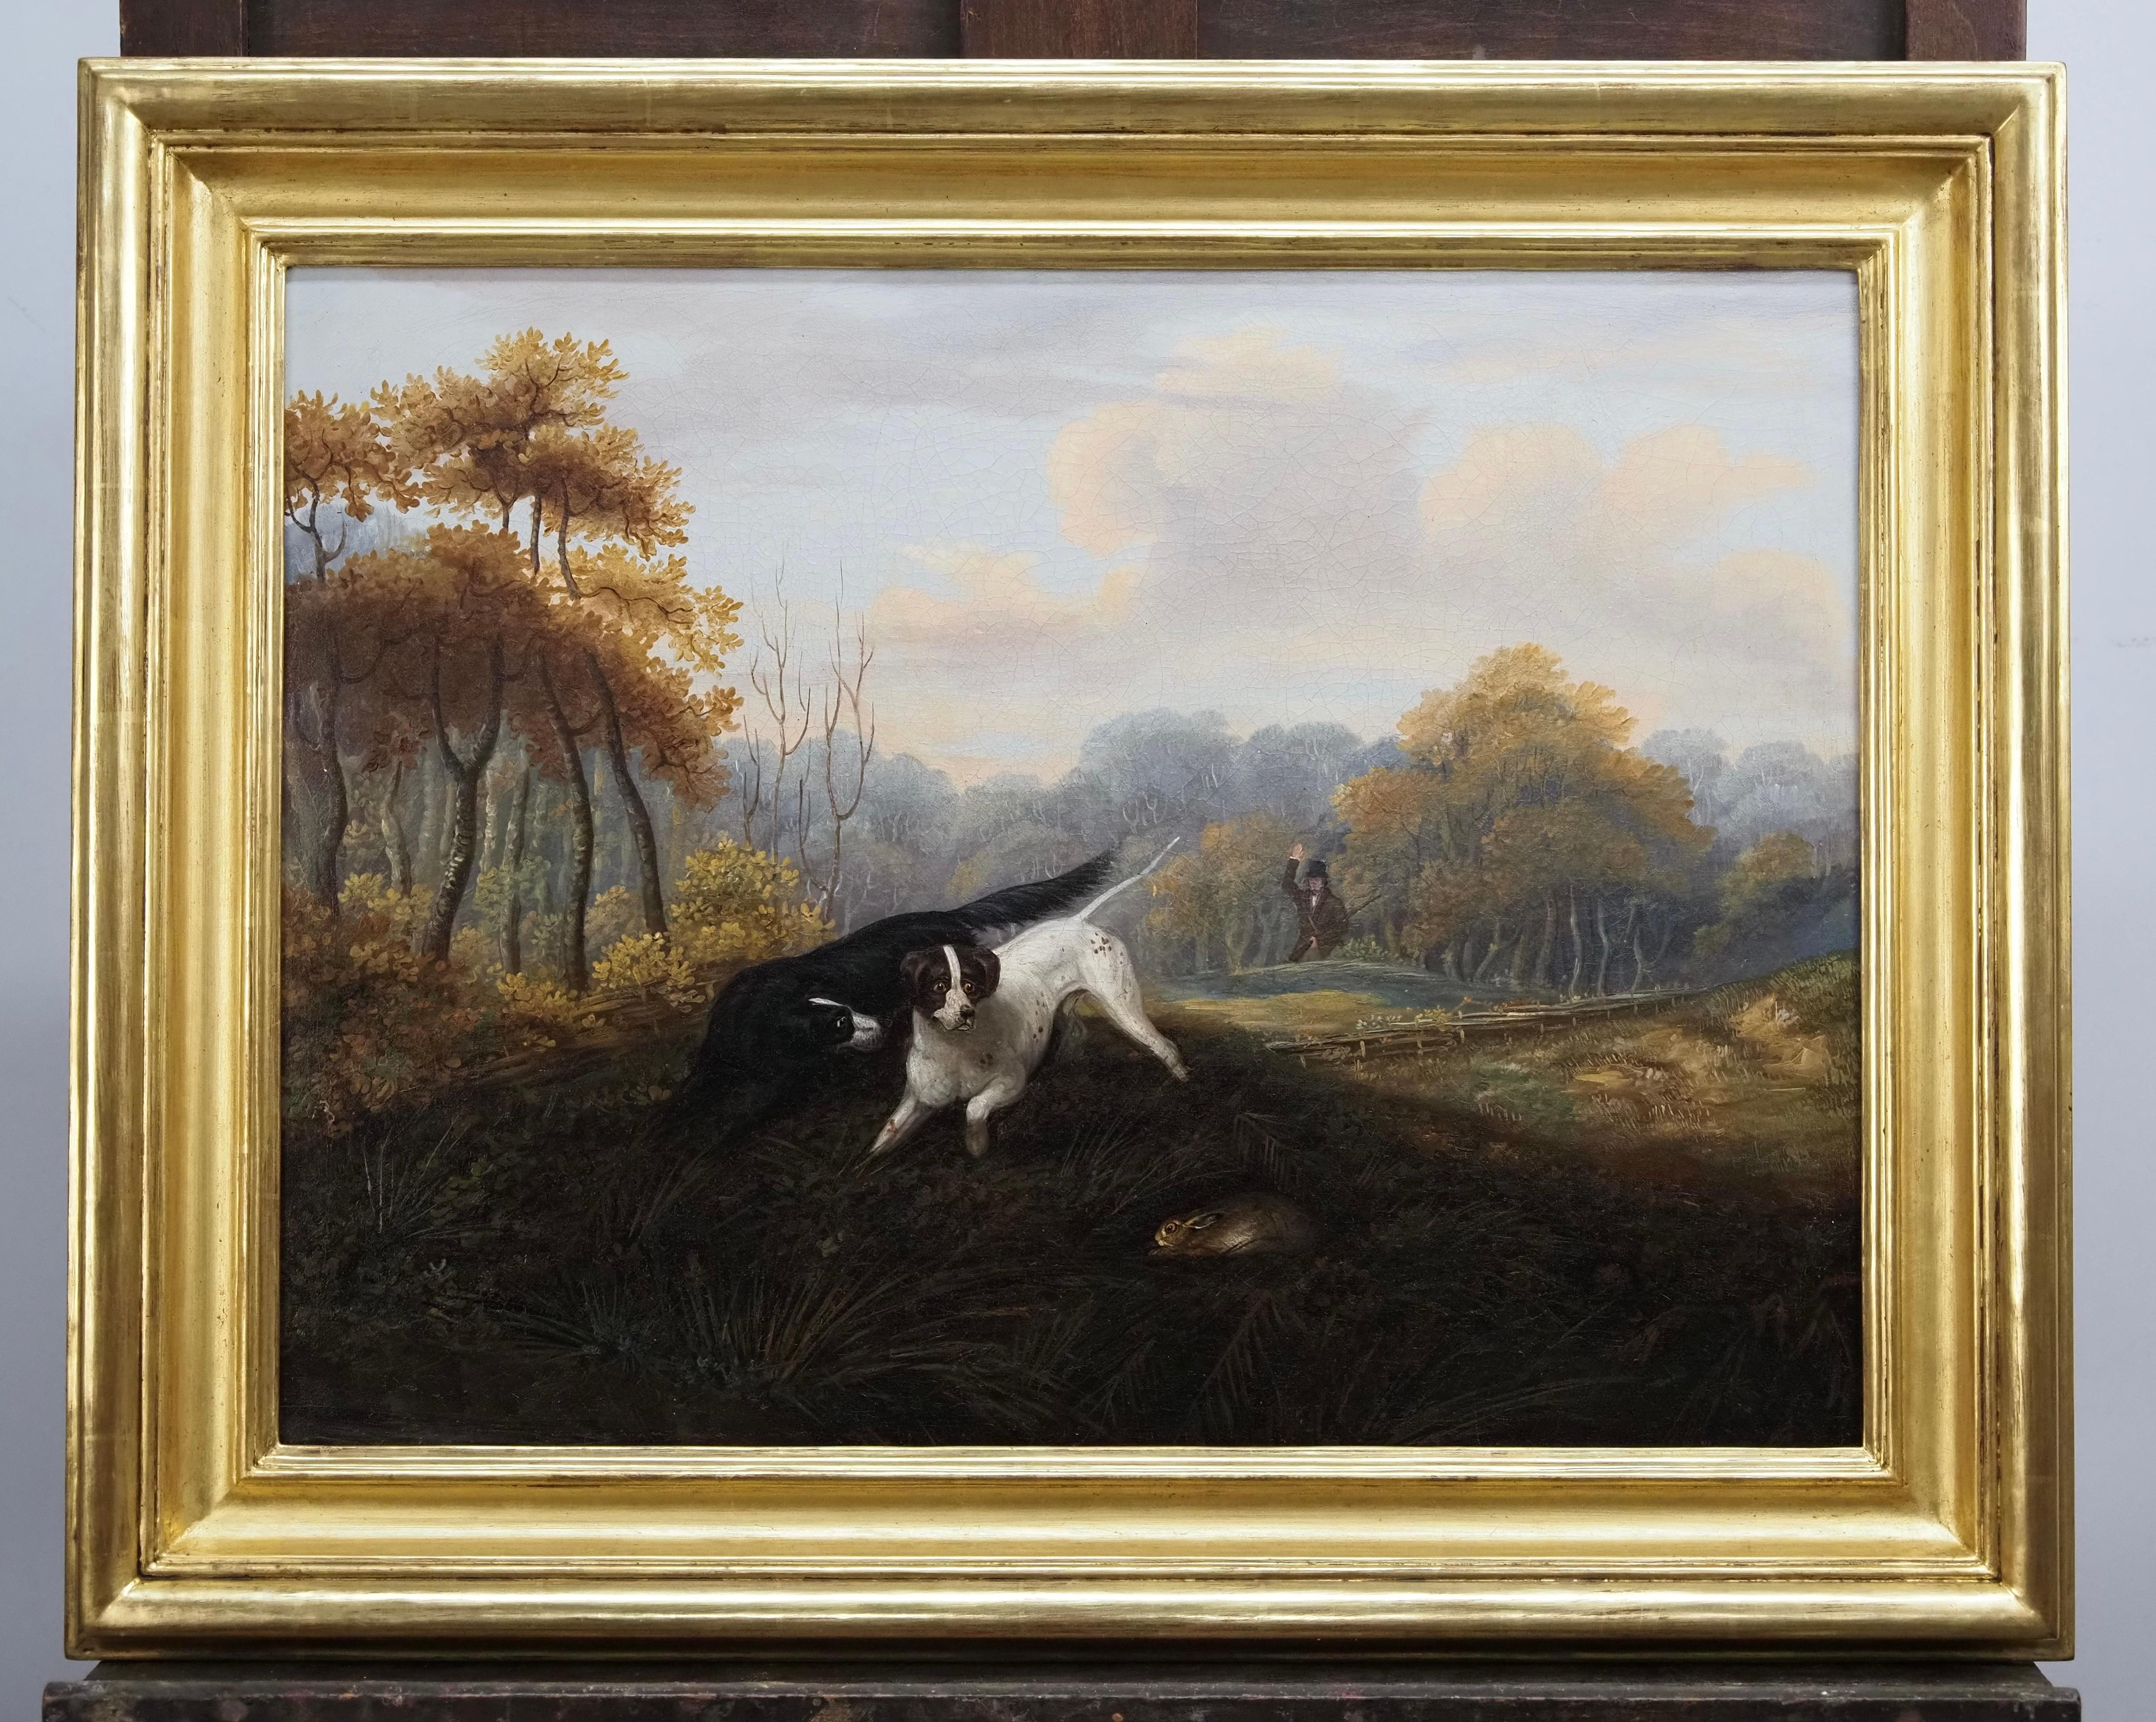 Two spaniels working with a huntsman beyond - Painting by William Jones